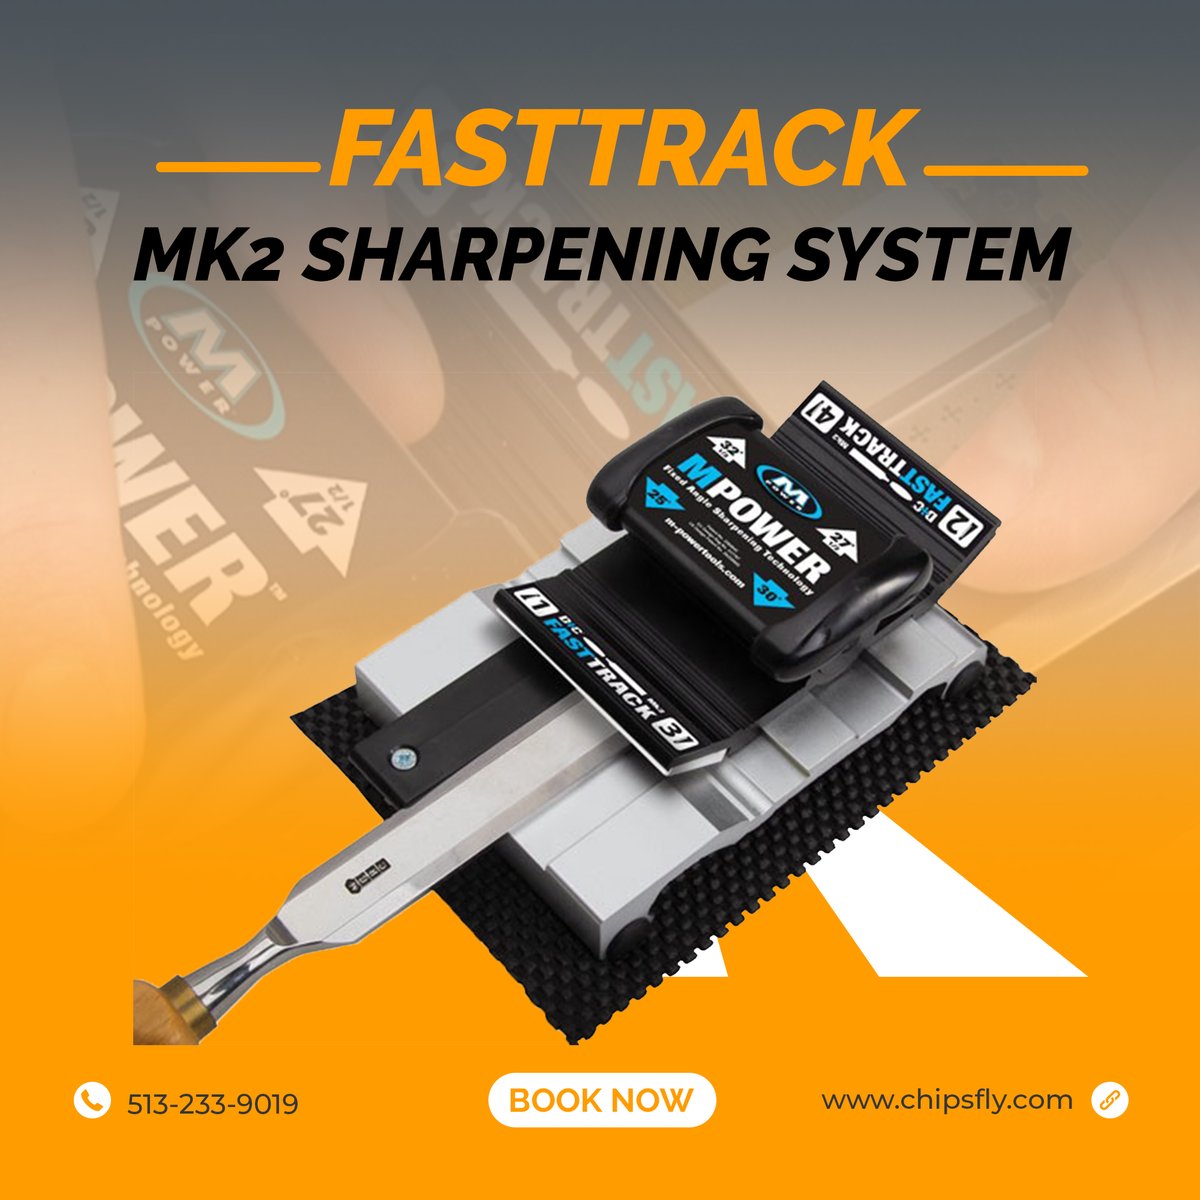 Whether you're a total beginner or the most discerning professional,fasttrack MK2 sharpening system will deliver the perfect sharpening angle and a super sharp edge again and again.
Buy now.

visit: chipsfly.com/FastTrack-MK2-…
#woodworkingtools #woodaccessories #craftsmangallery